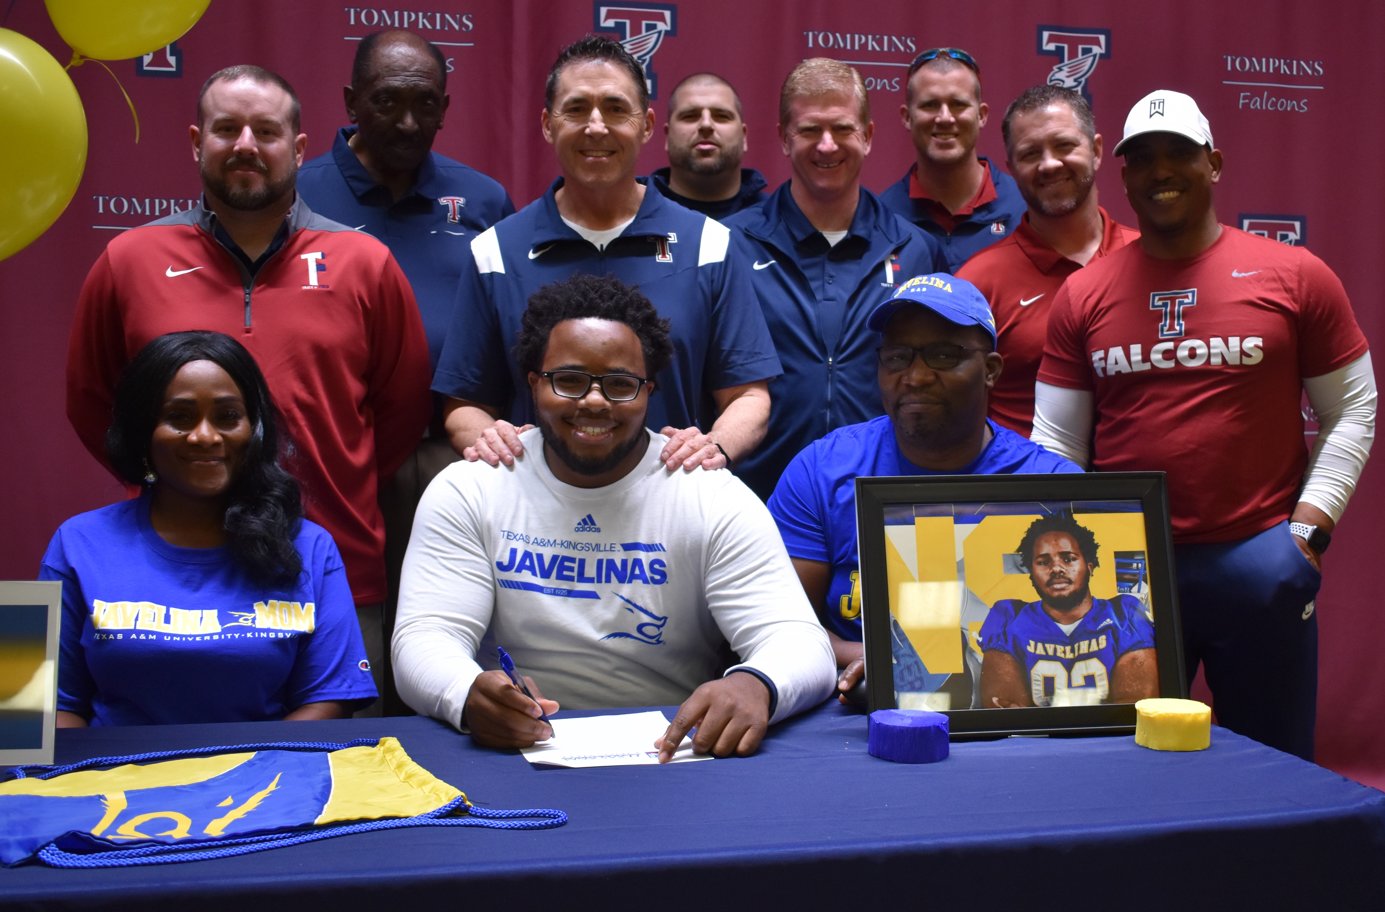 Eti-Eni Bassey signed to play football at Texas A&M-Kingsville.